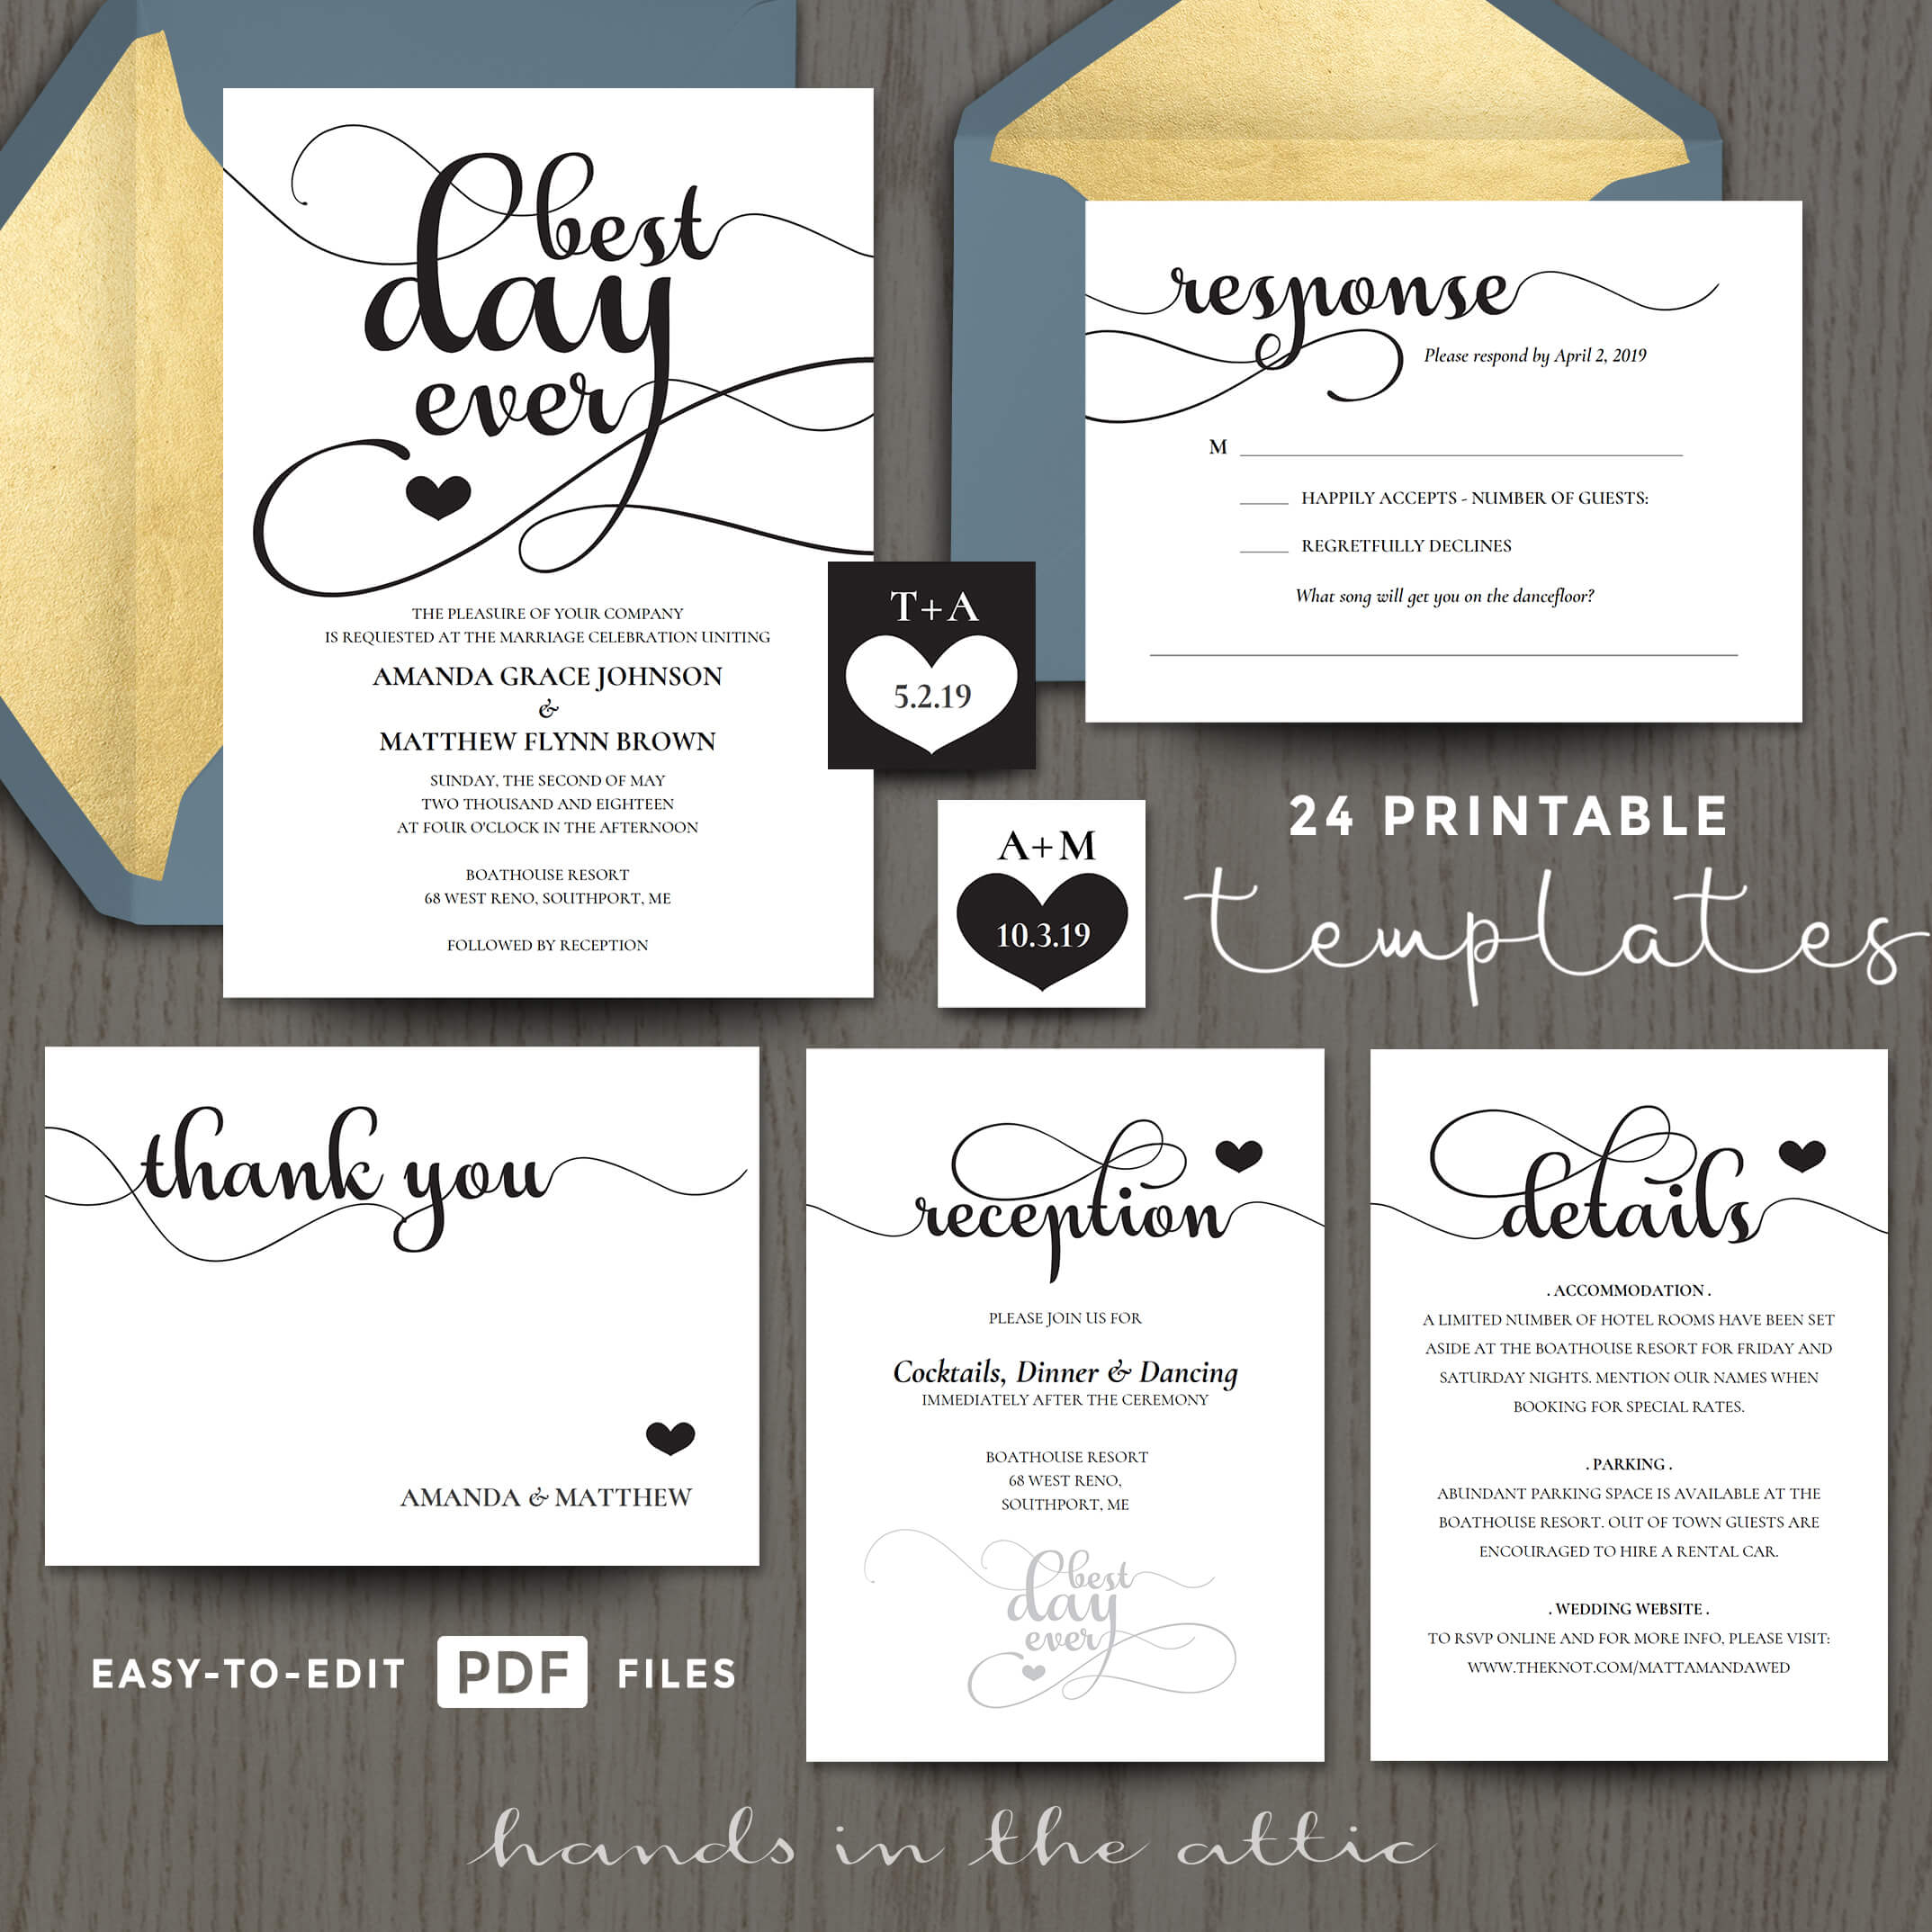 Best Day Ever Wedding Invitation Templates Hands In The Attic within dimensions 2147 X 2147